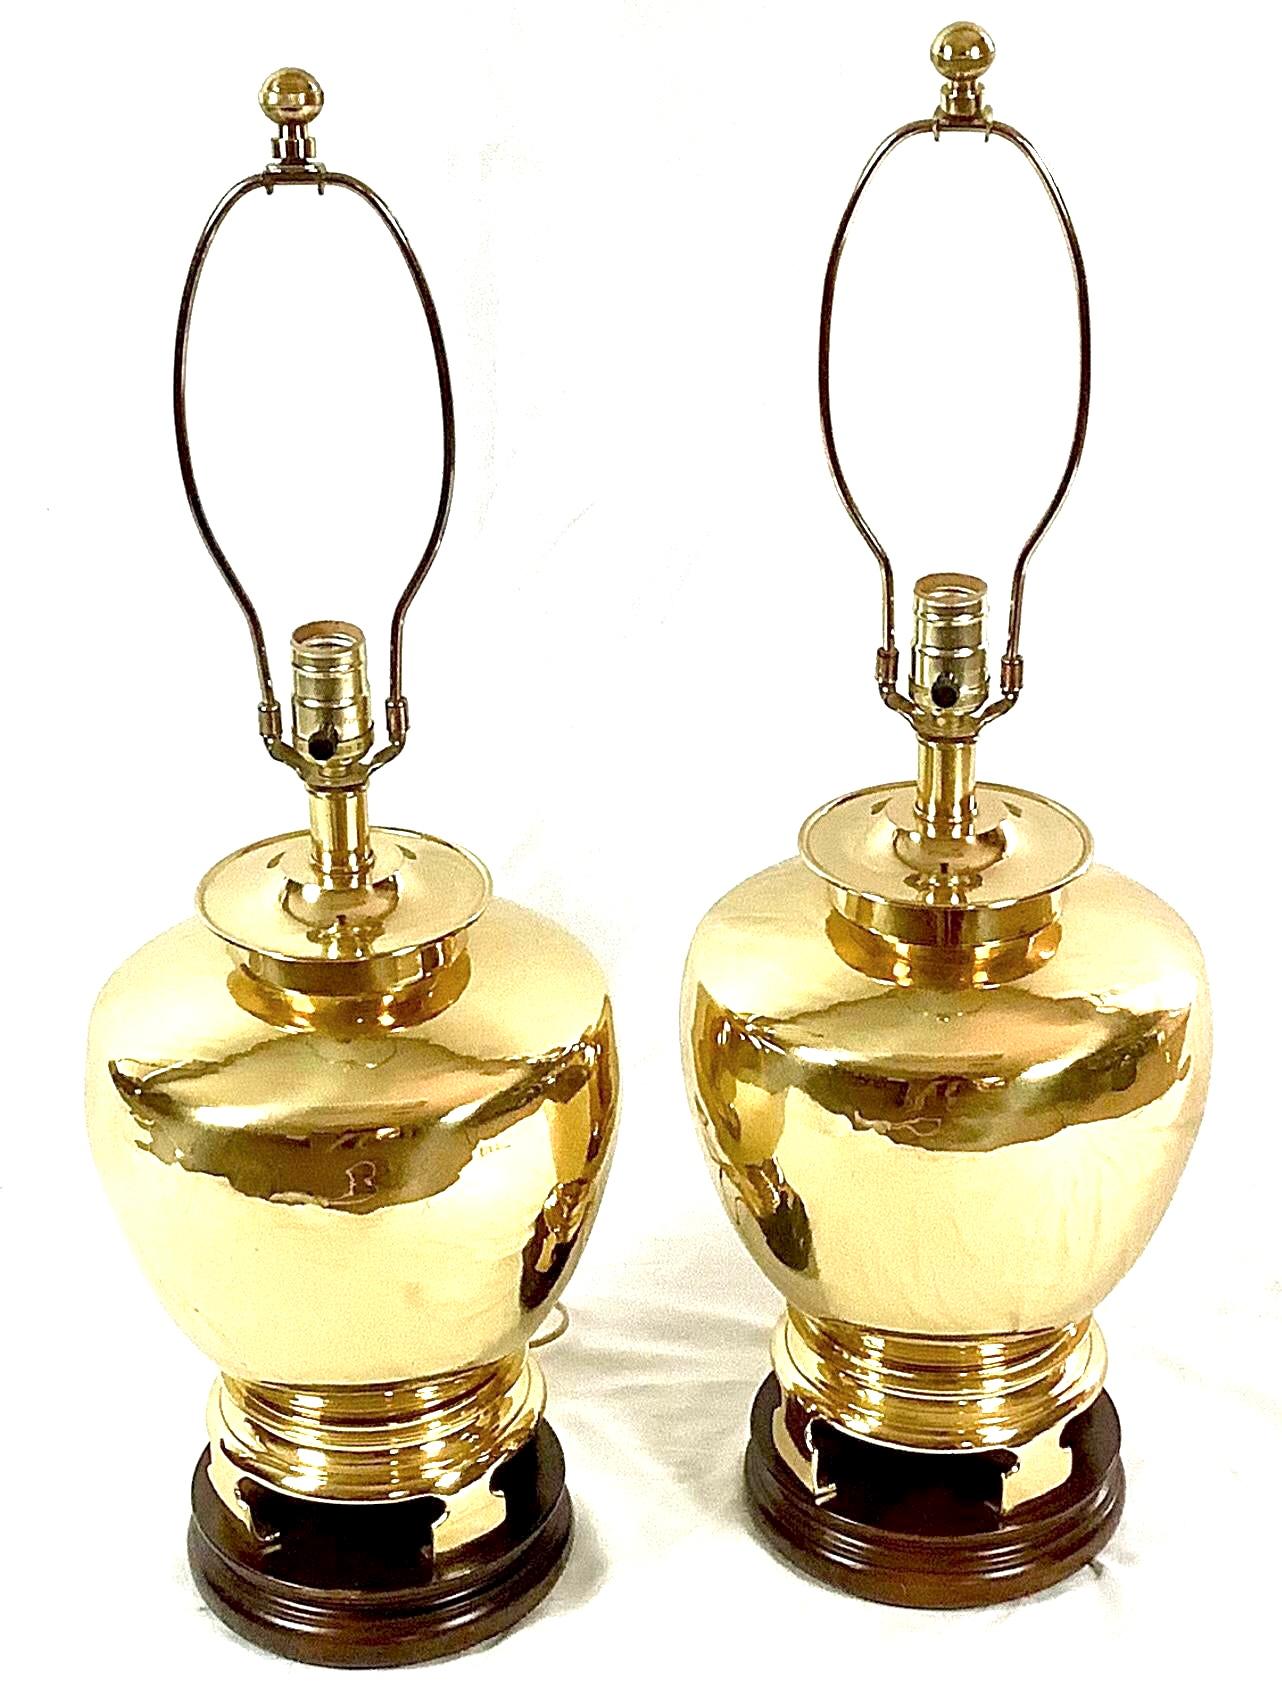 This is a pair of brass Hollywood Regency style Fredrick cooper table lamps in the Chinese manner. They are in the original finish and in working order. Harps and finials included. No shades.